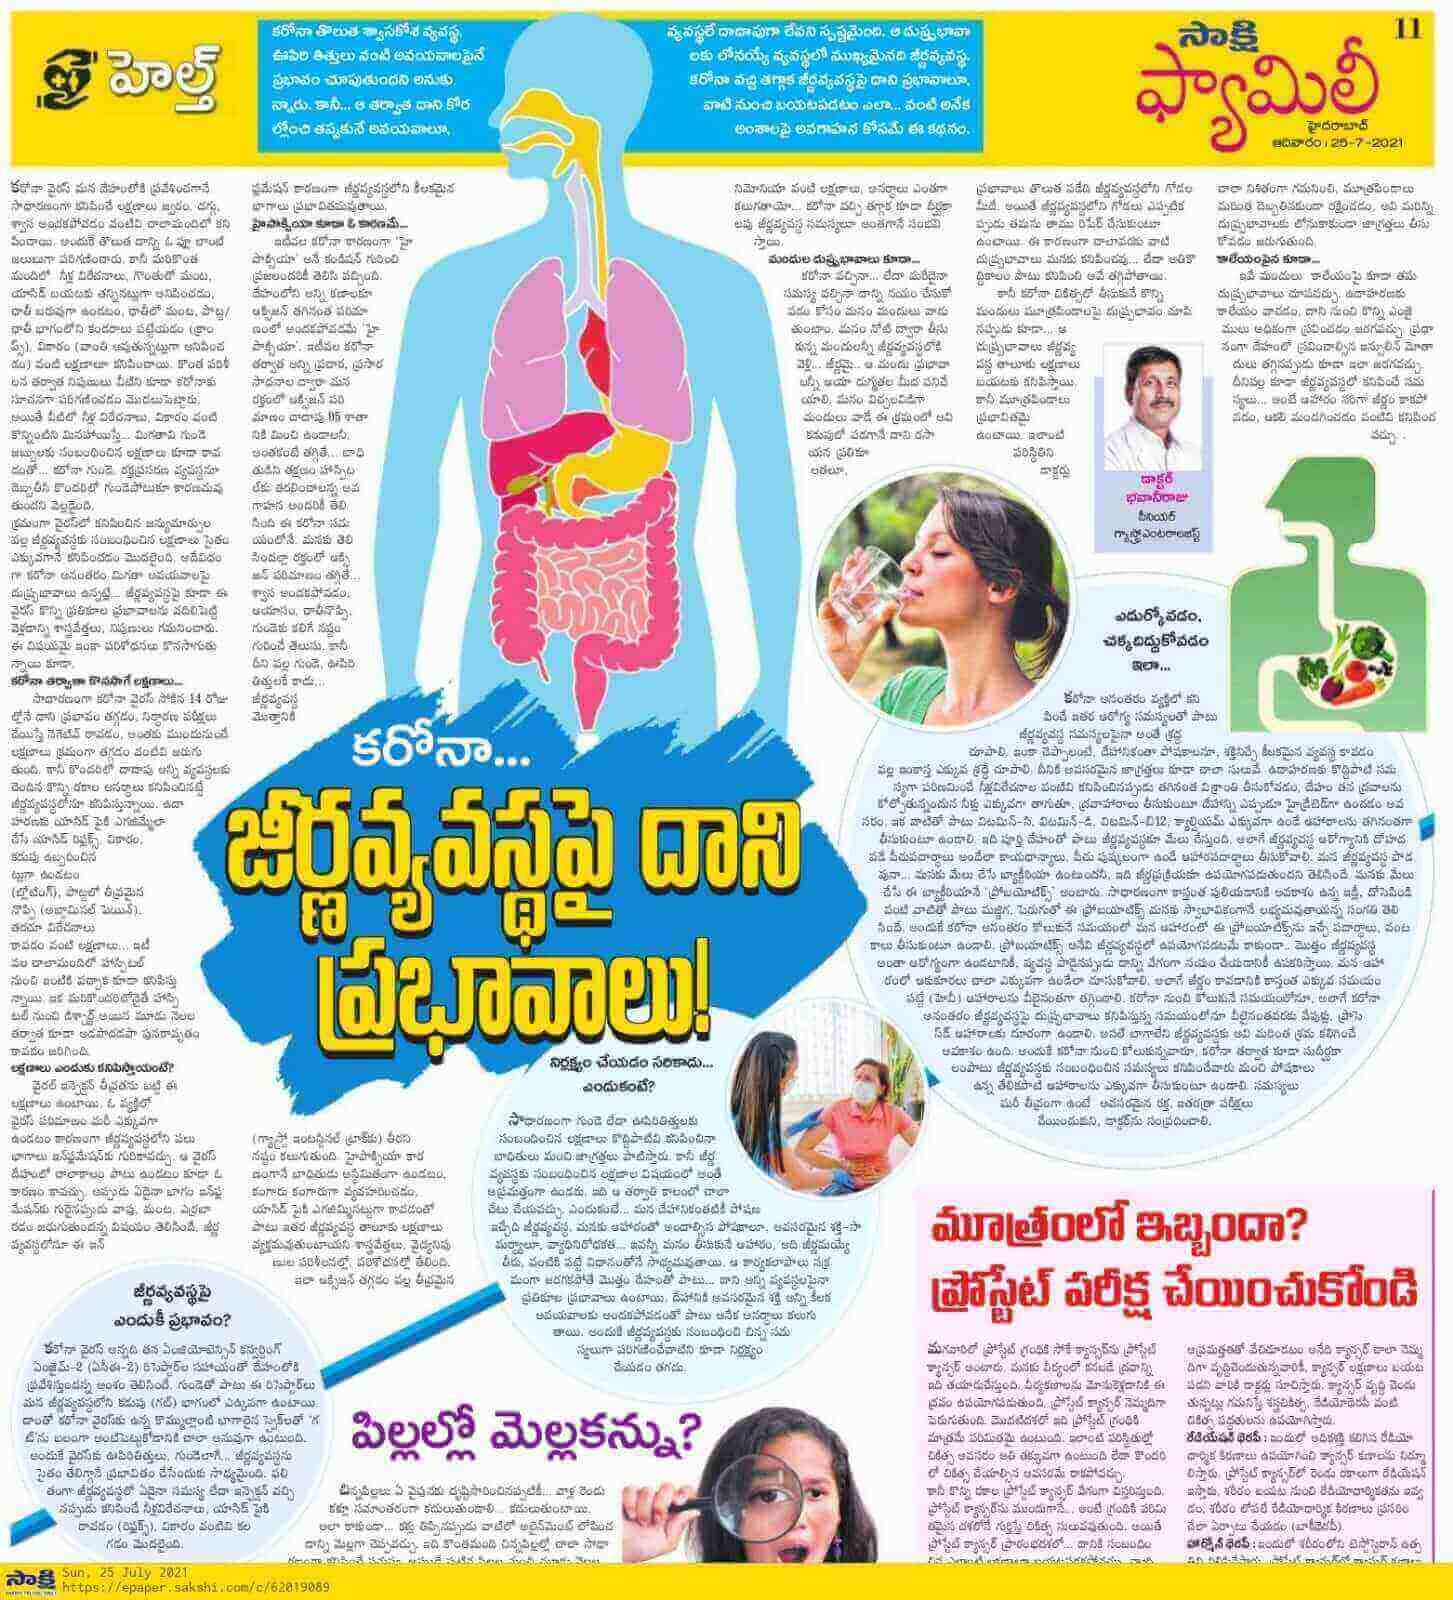 Article on Corona and Its Effects on Digestion System by Dr. PBSS Raju (Bhavani) - Consultant Medical Gastroenterologist